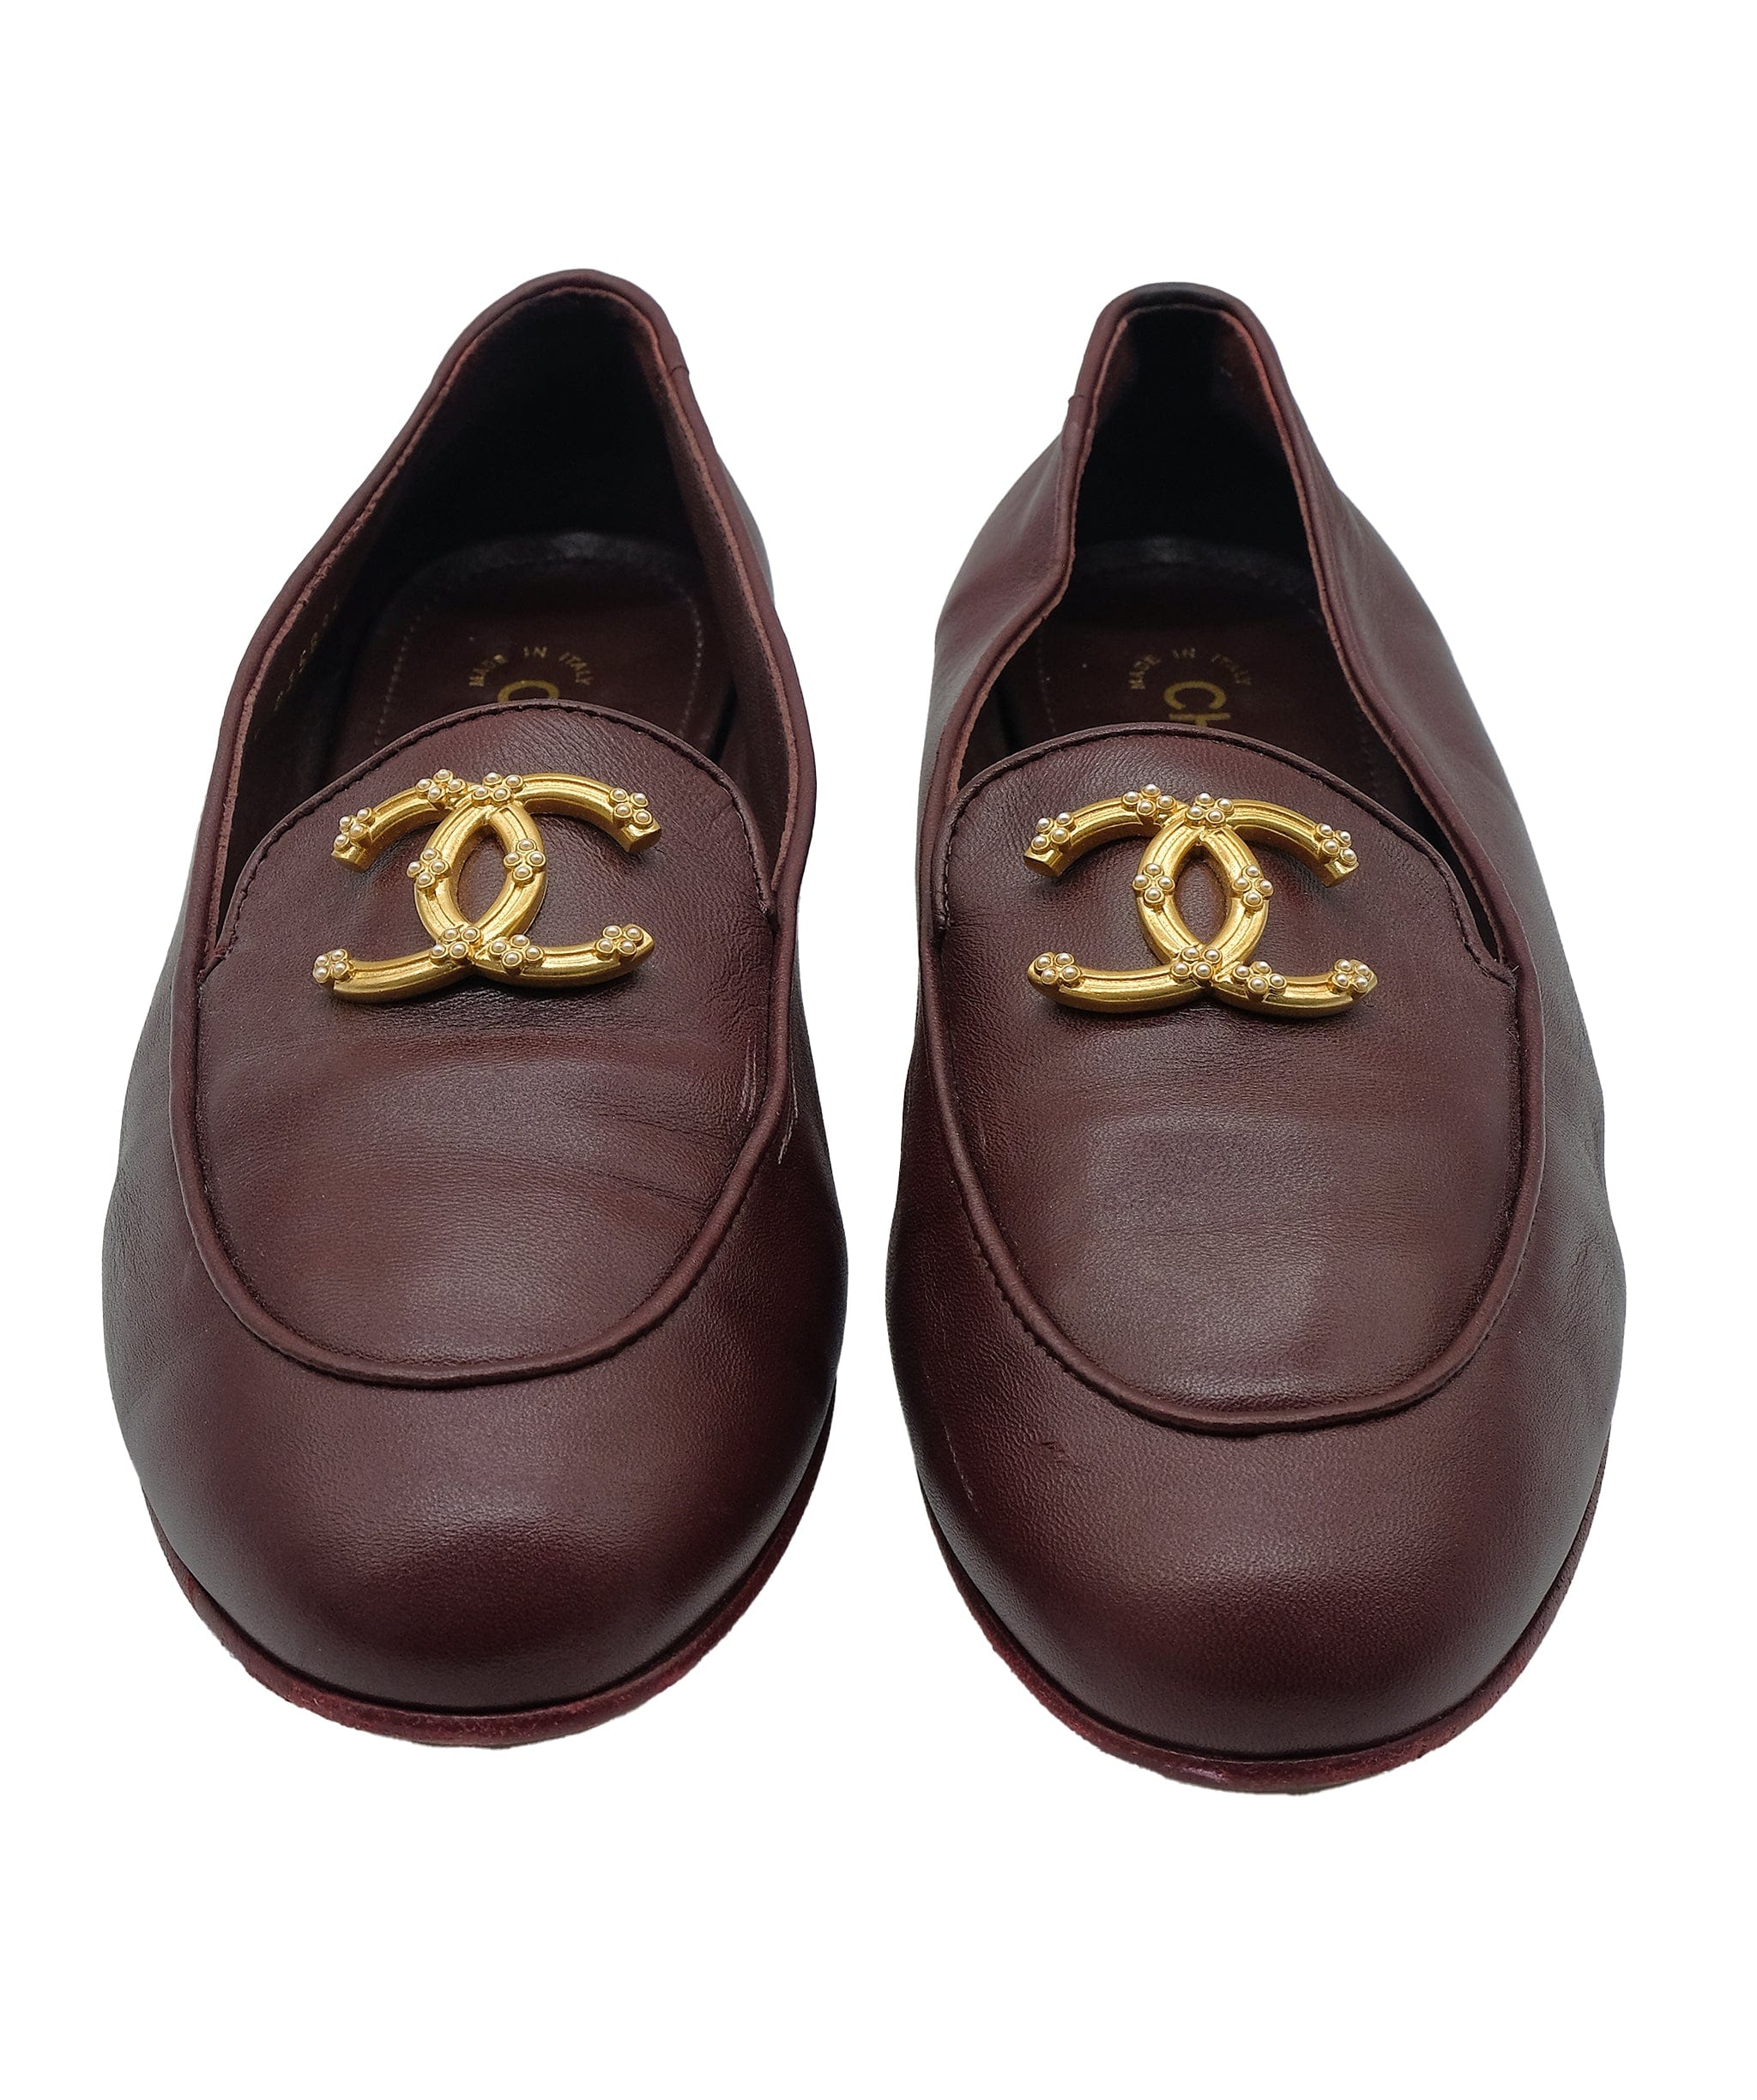 Chanel Chanel Burgundy Shoes 40